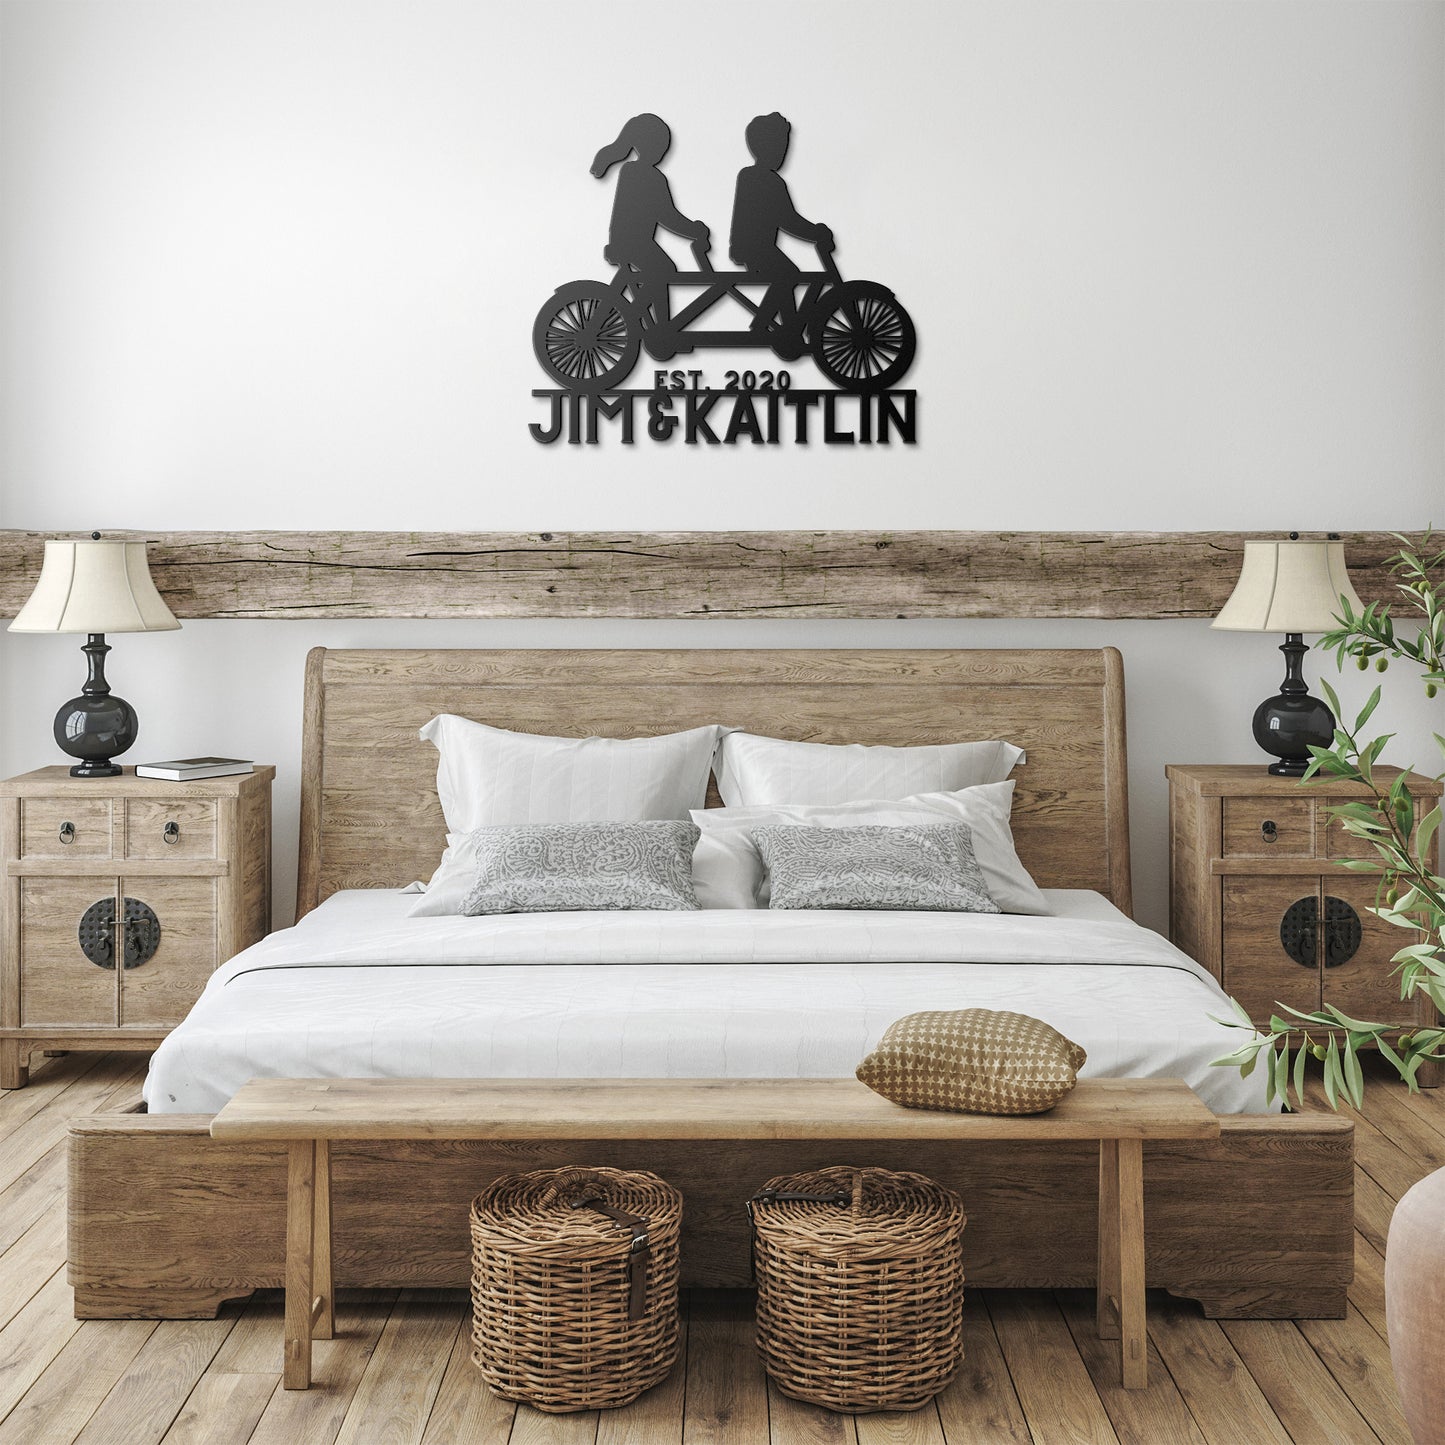 A bedroom with a teelaunch Couple Cycle on Tandem Bike Metal Wall Art on the bedside table.